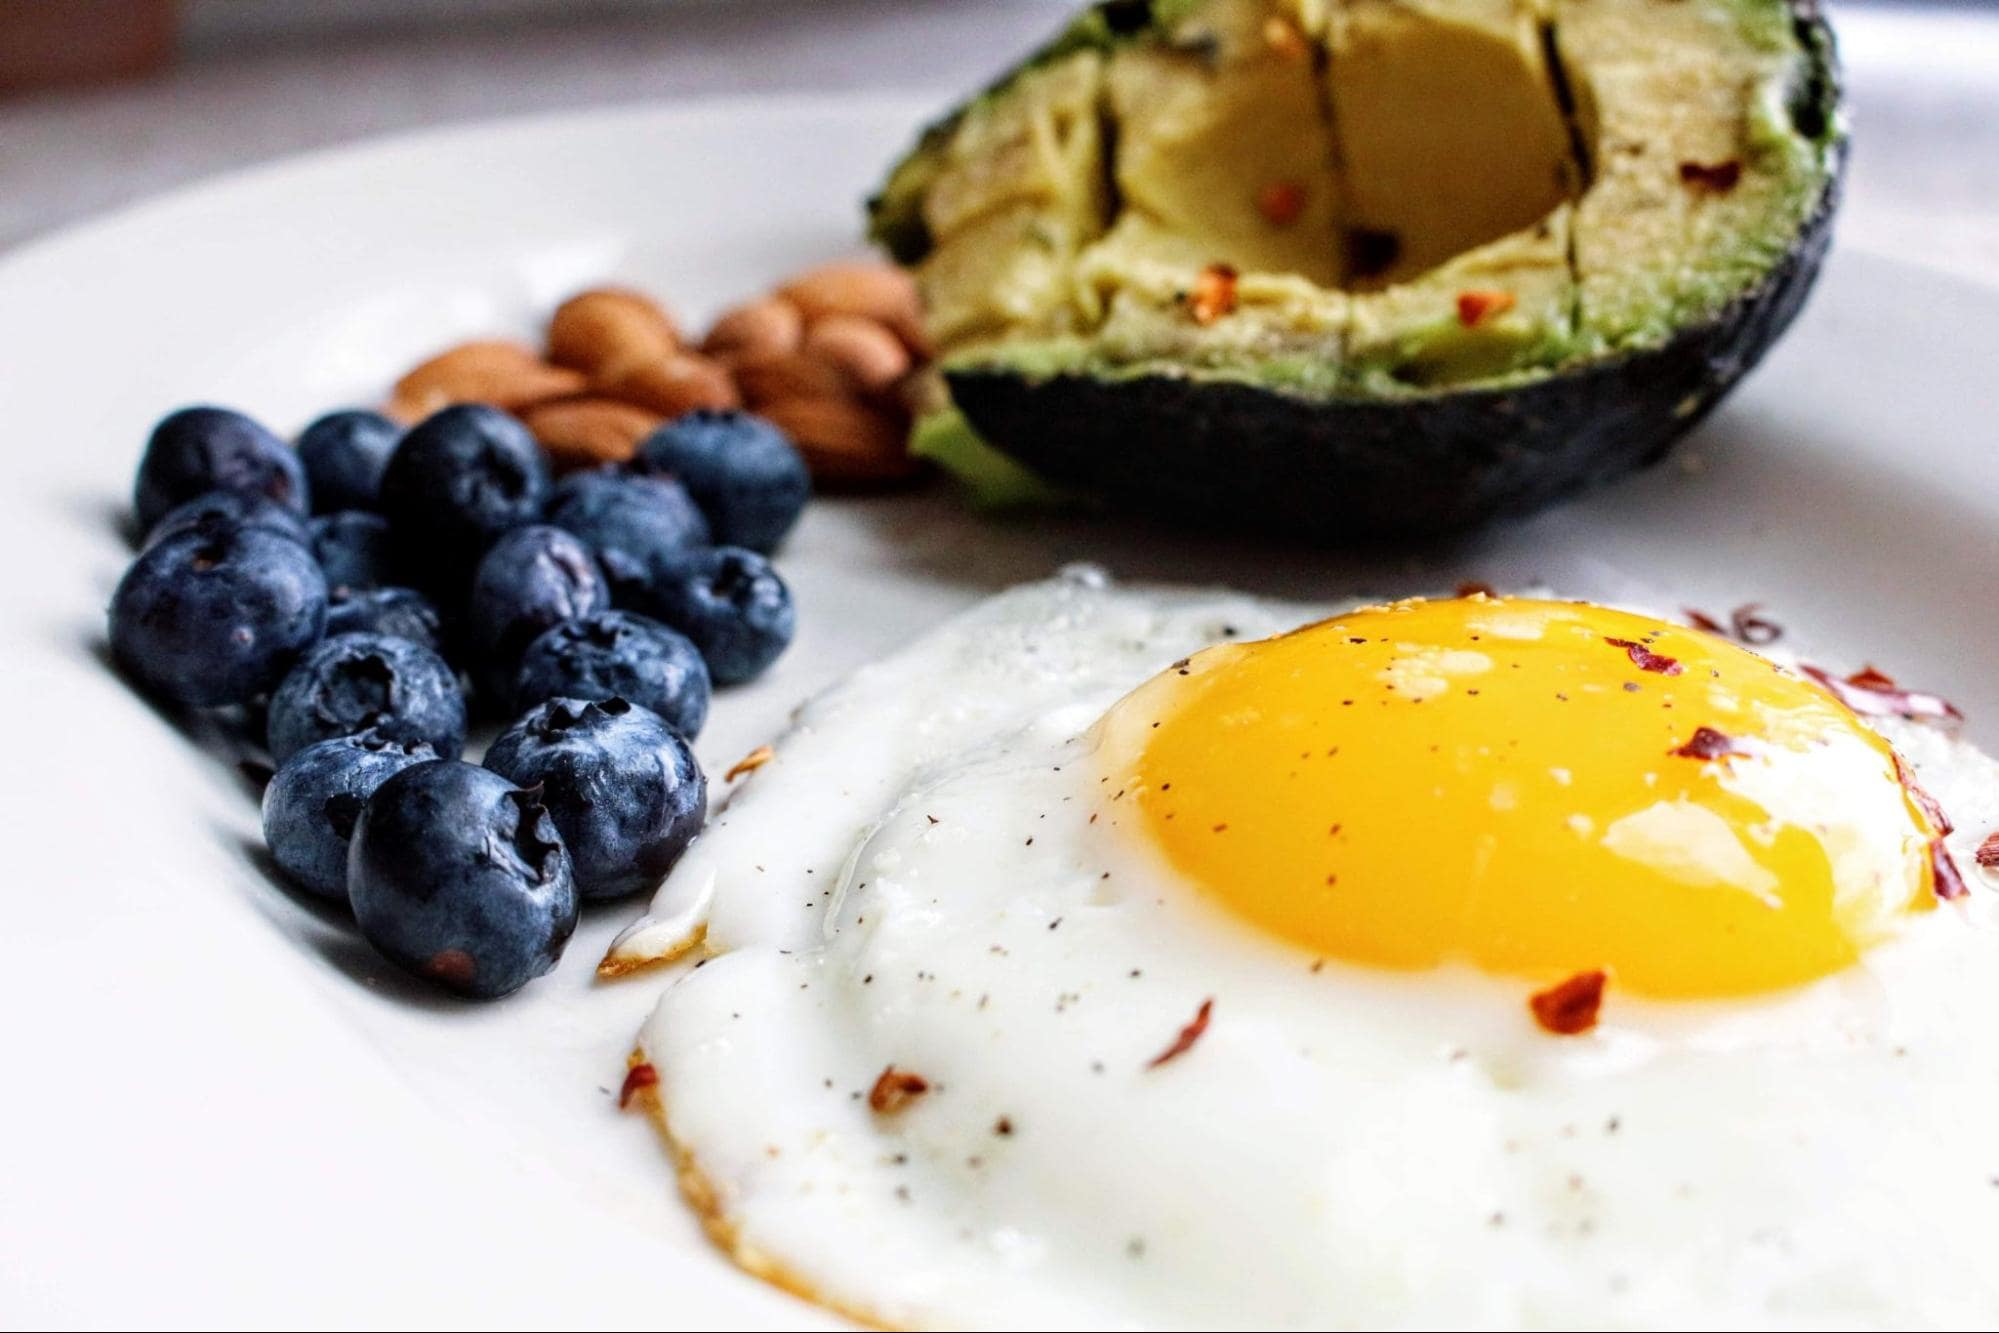 image of a fried egg, blueberries, avocado, and beans on a plate